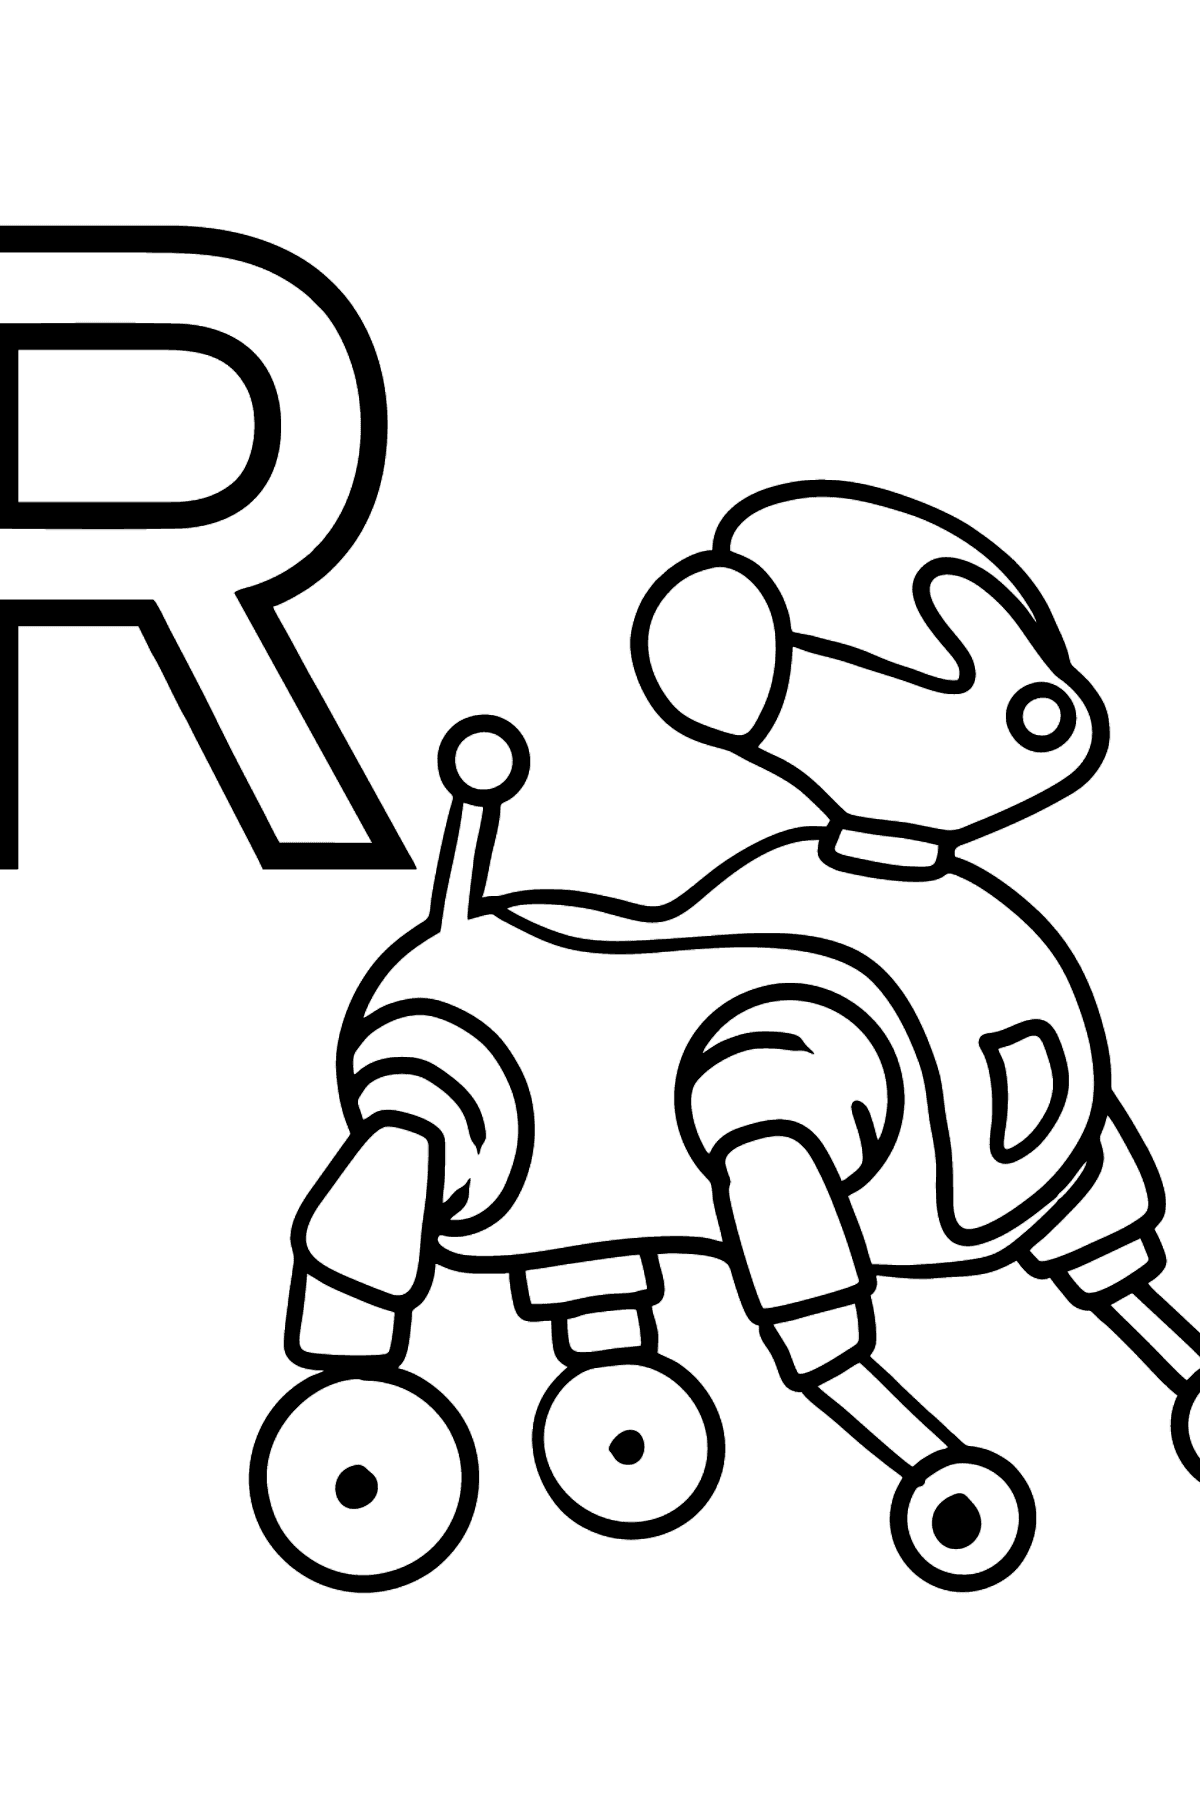 English Letter R coloring pages - ROBOT - Coloring Pages for Kids